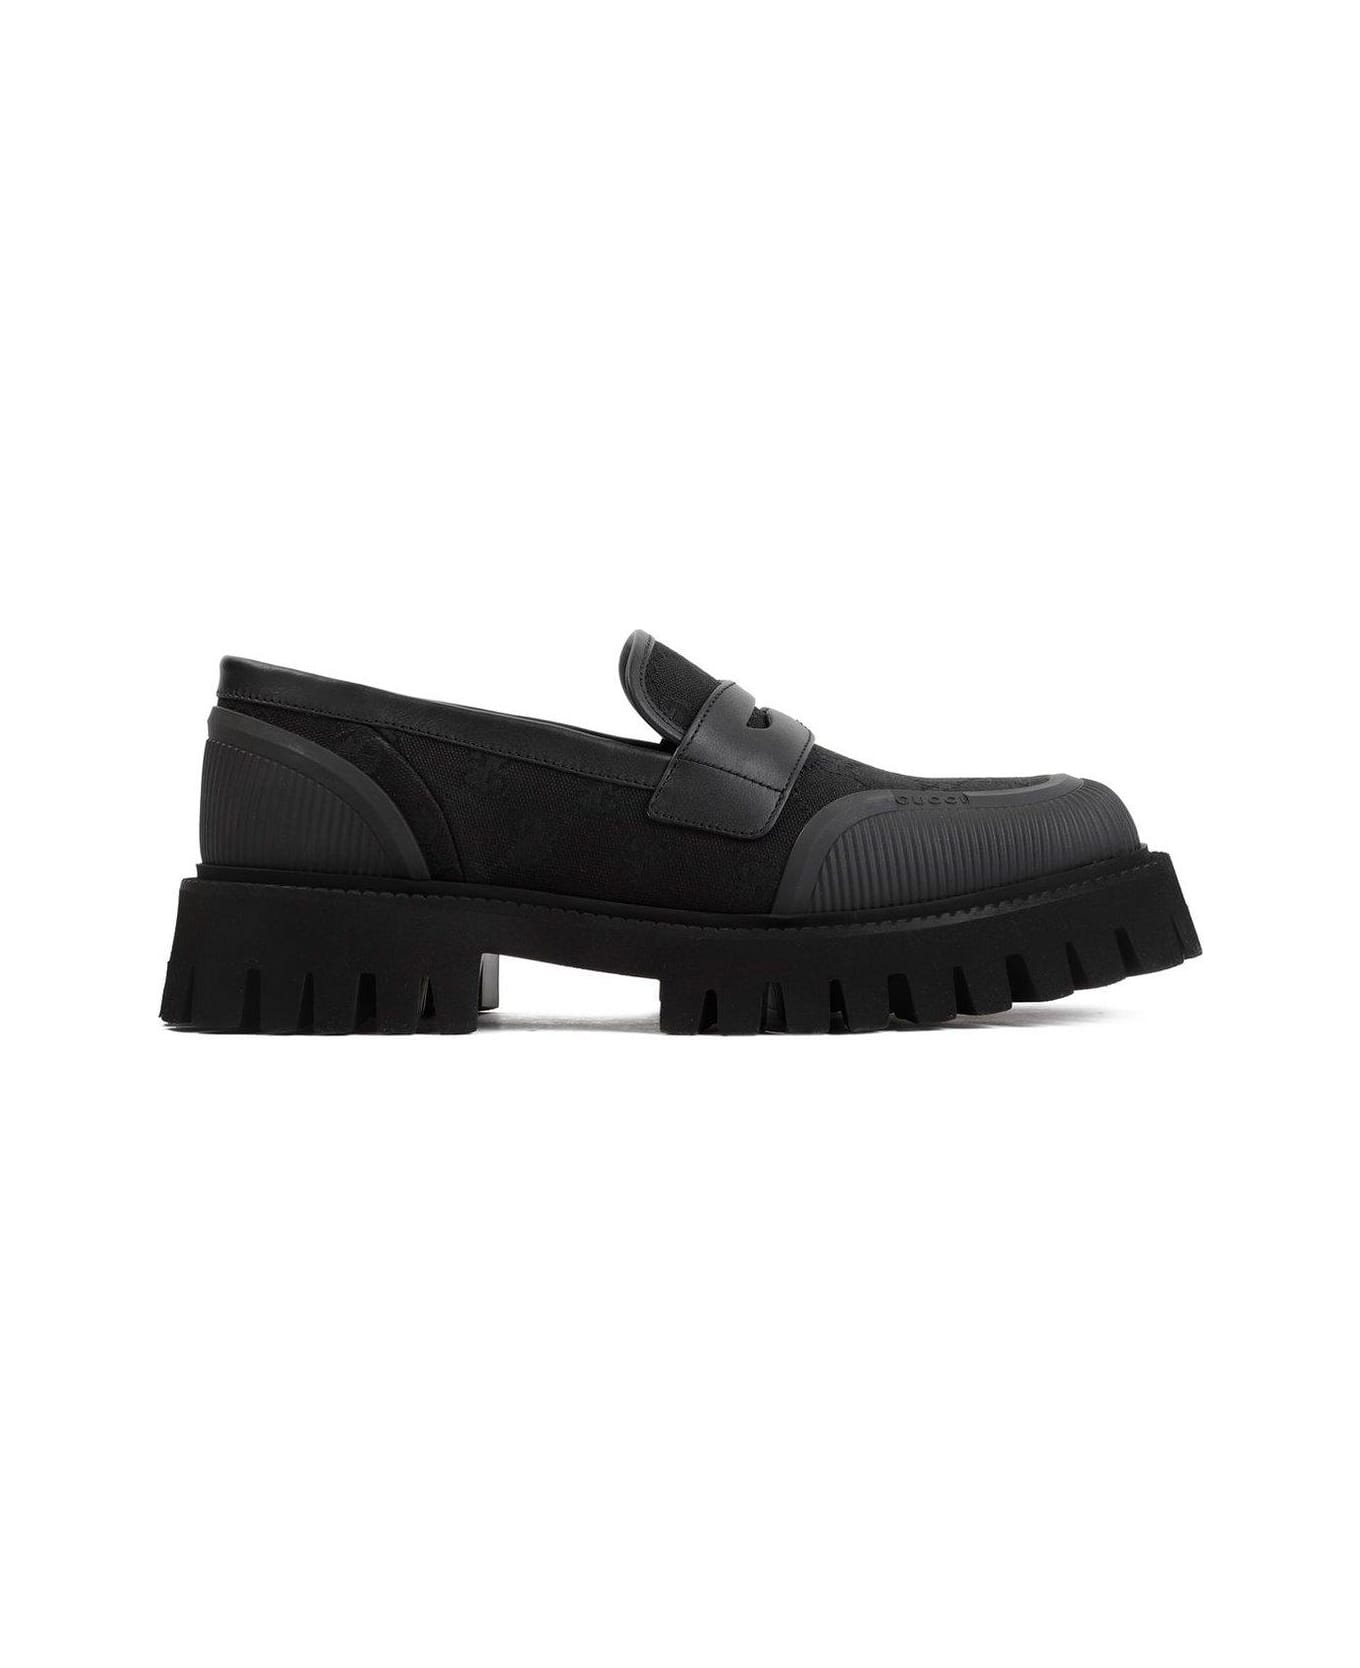 Gucci Gg Supreme Chunky Sole Loafers